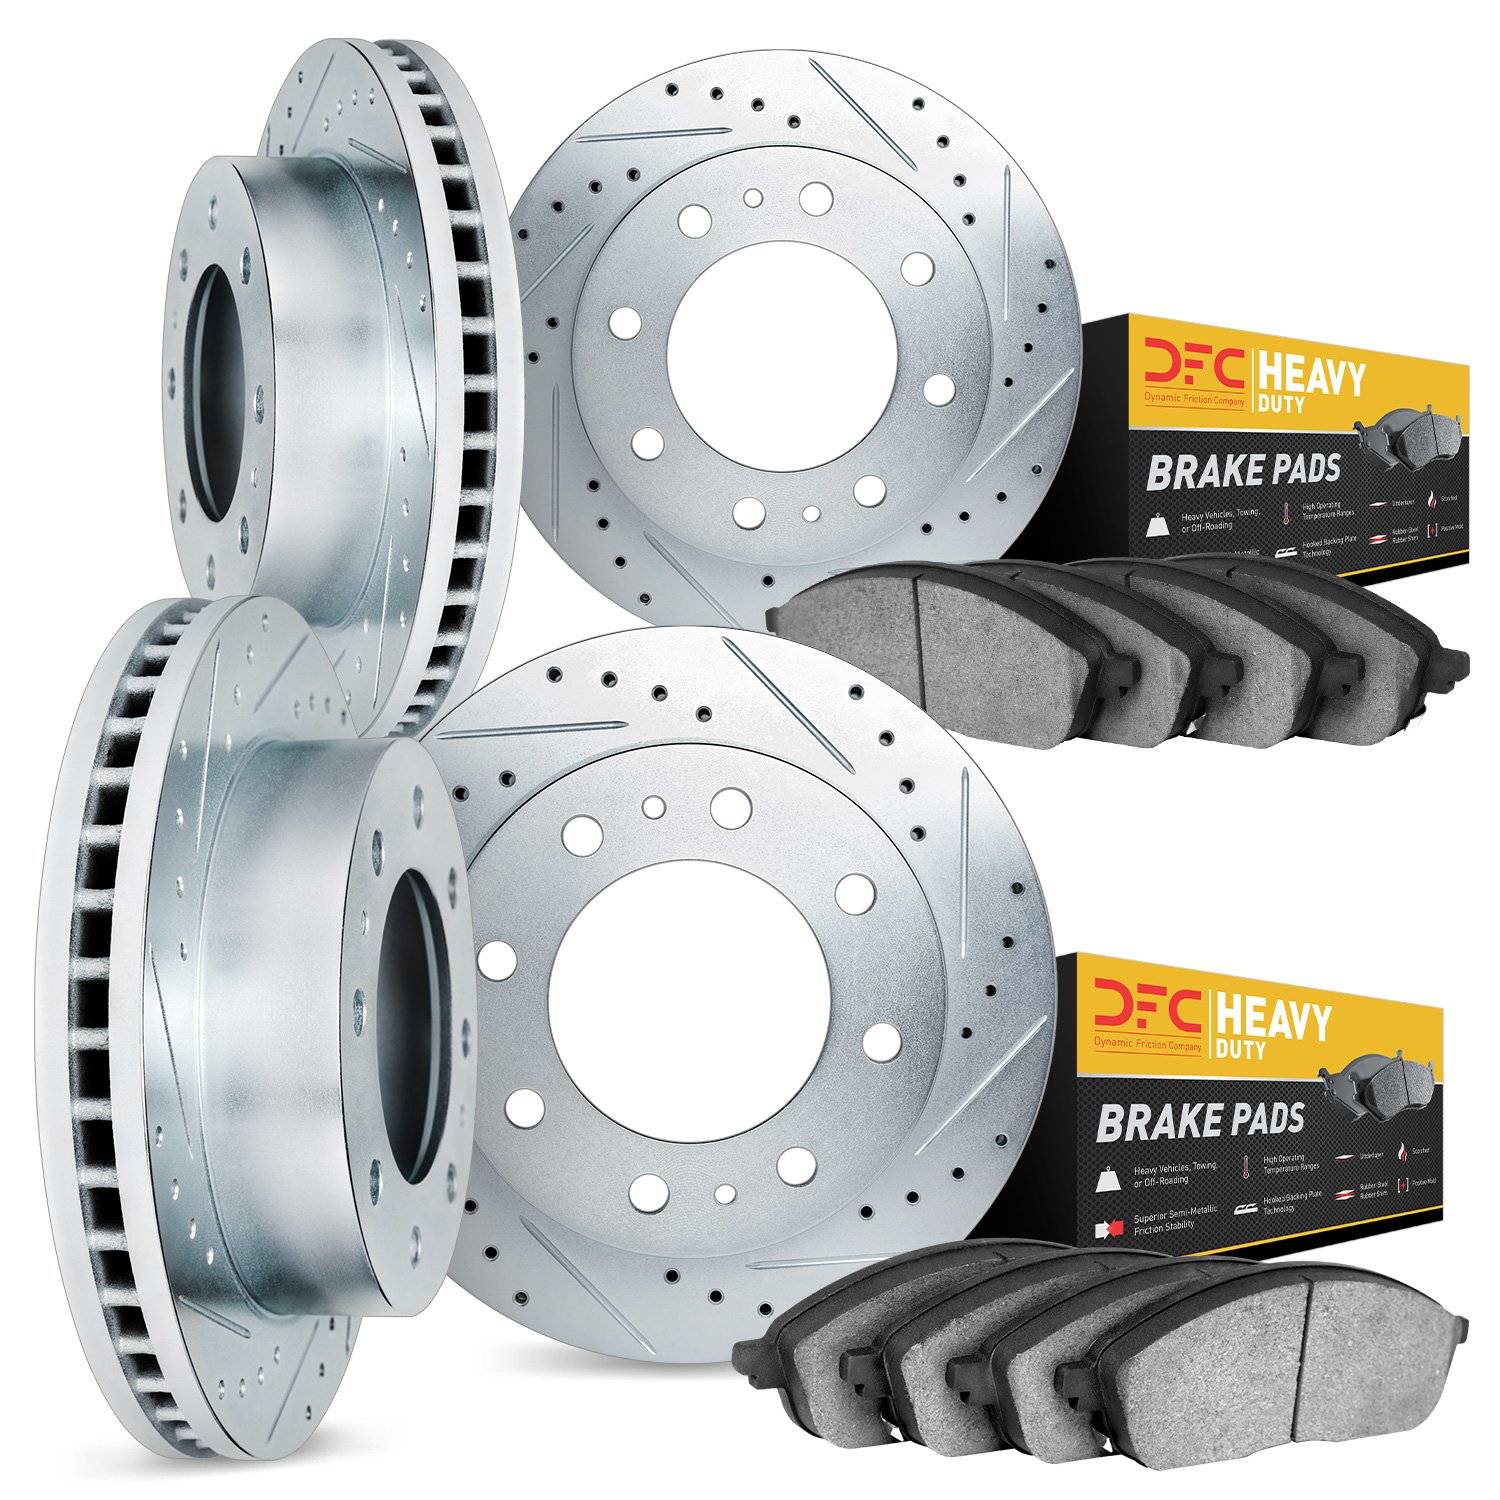 7204-48132 Drilled/Slotted Rotors w/Heavy-Duty Brake Pads Kit [Silver], 2003-2020 GM, Position: Front and Rear